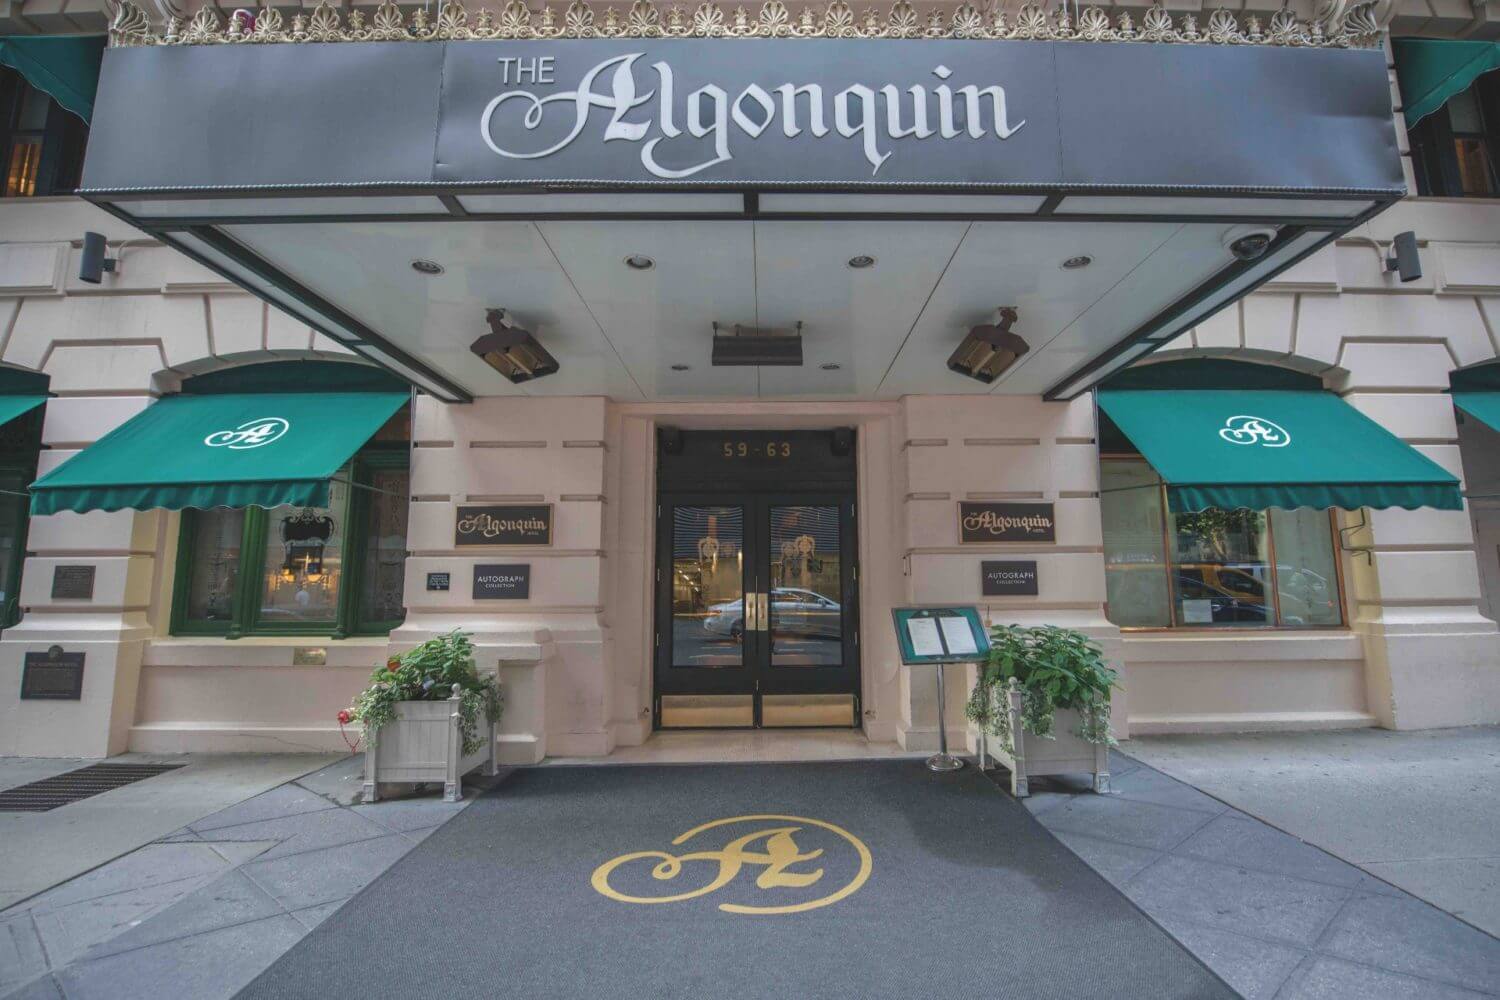 The Algonquin - Photo credit: Fantrippers